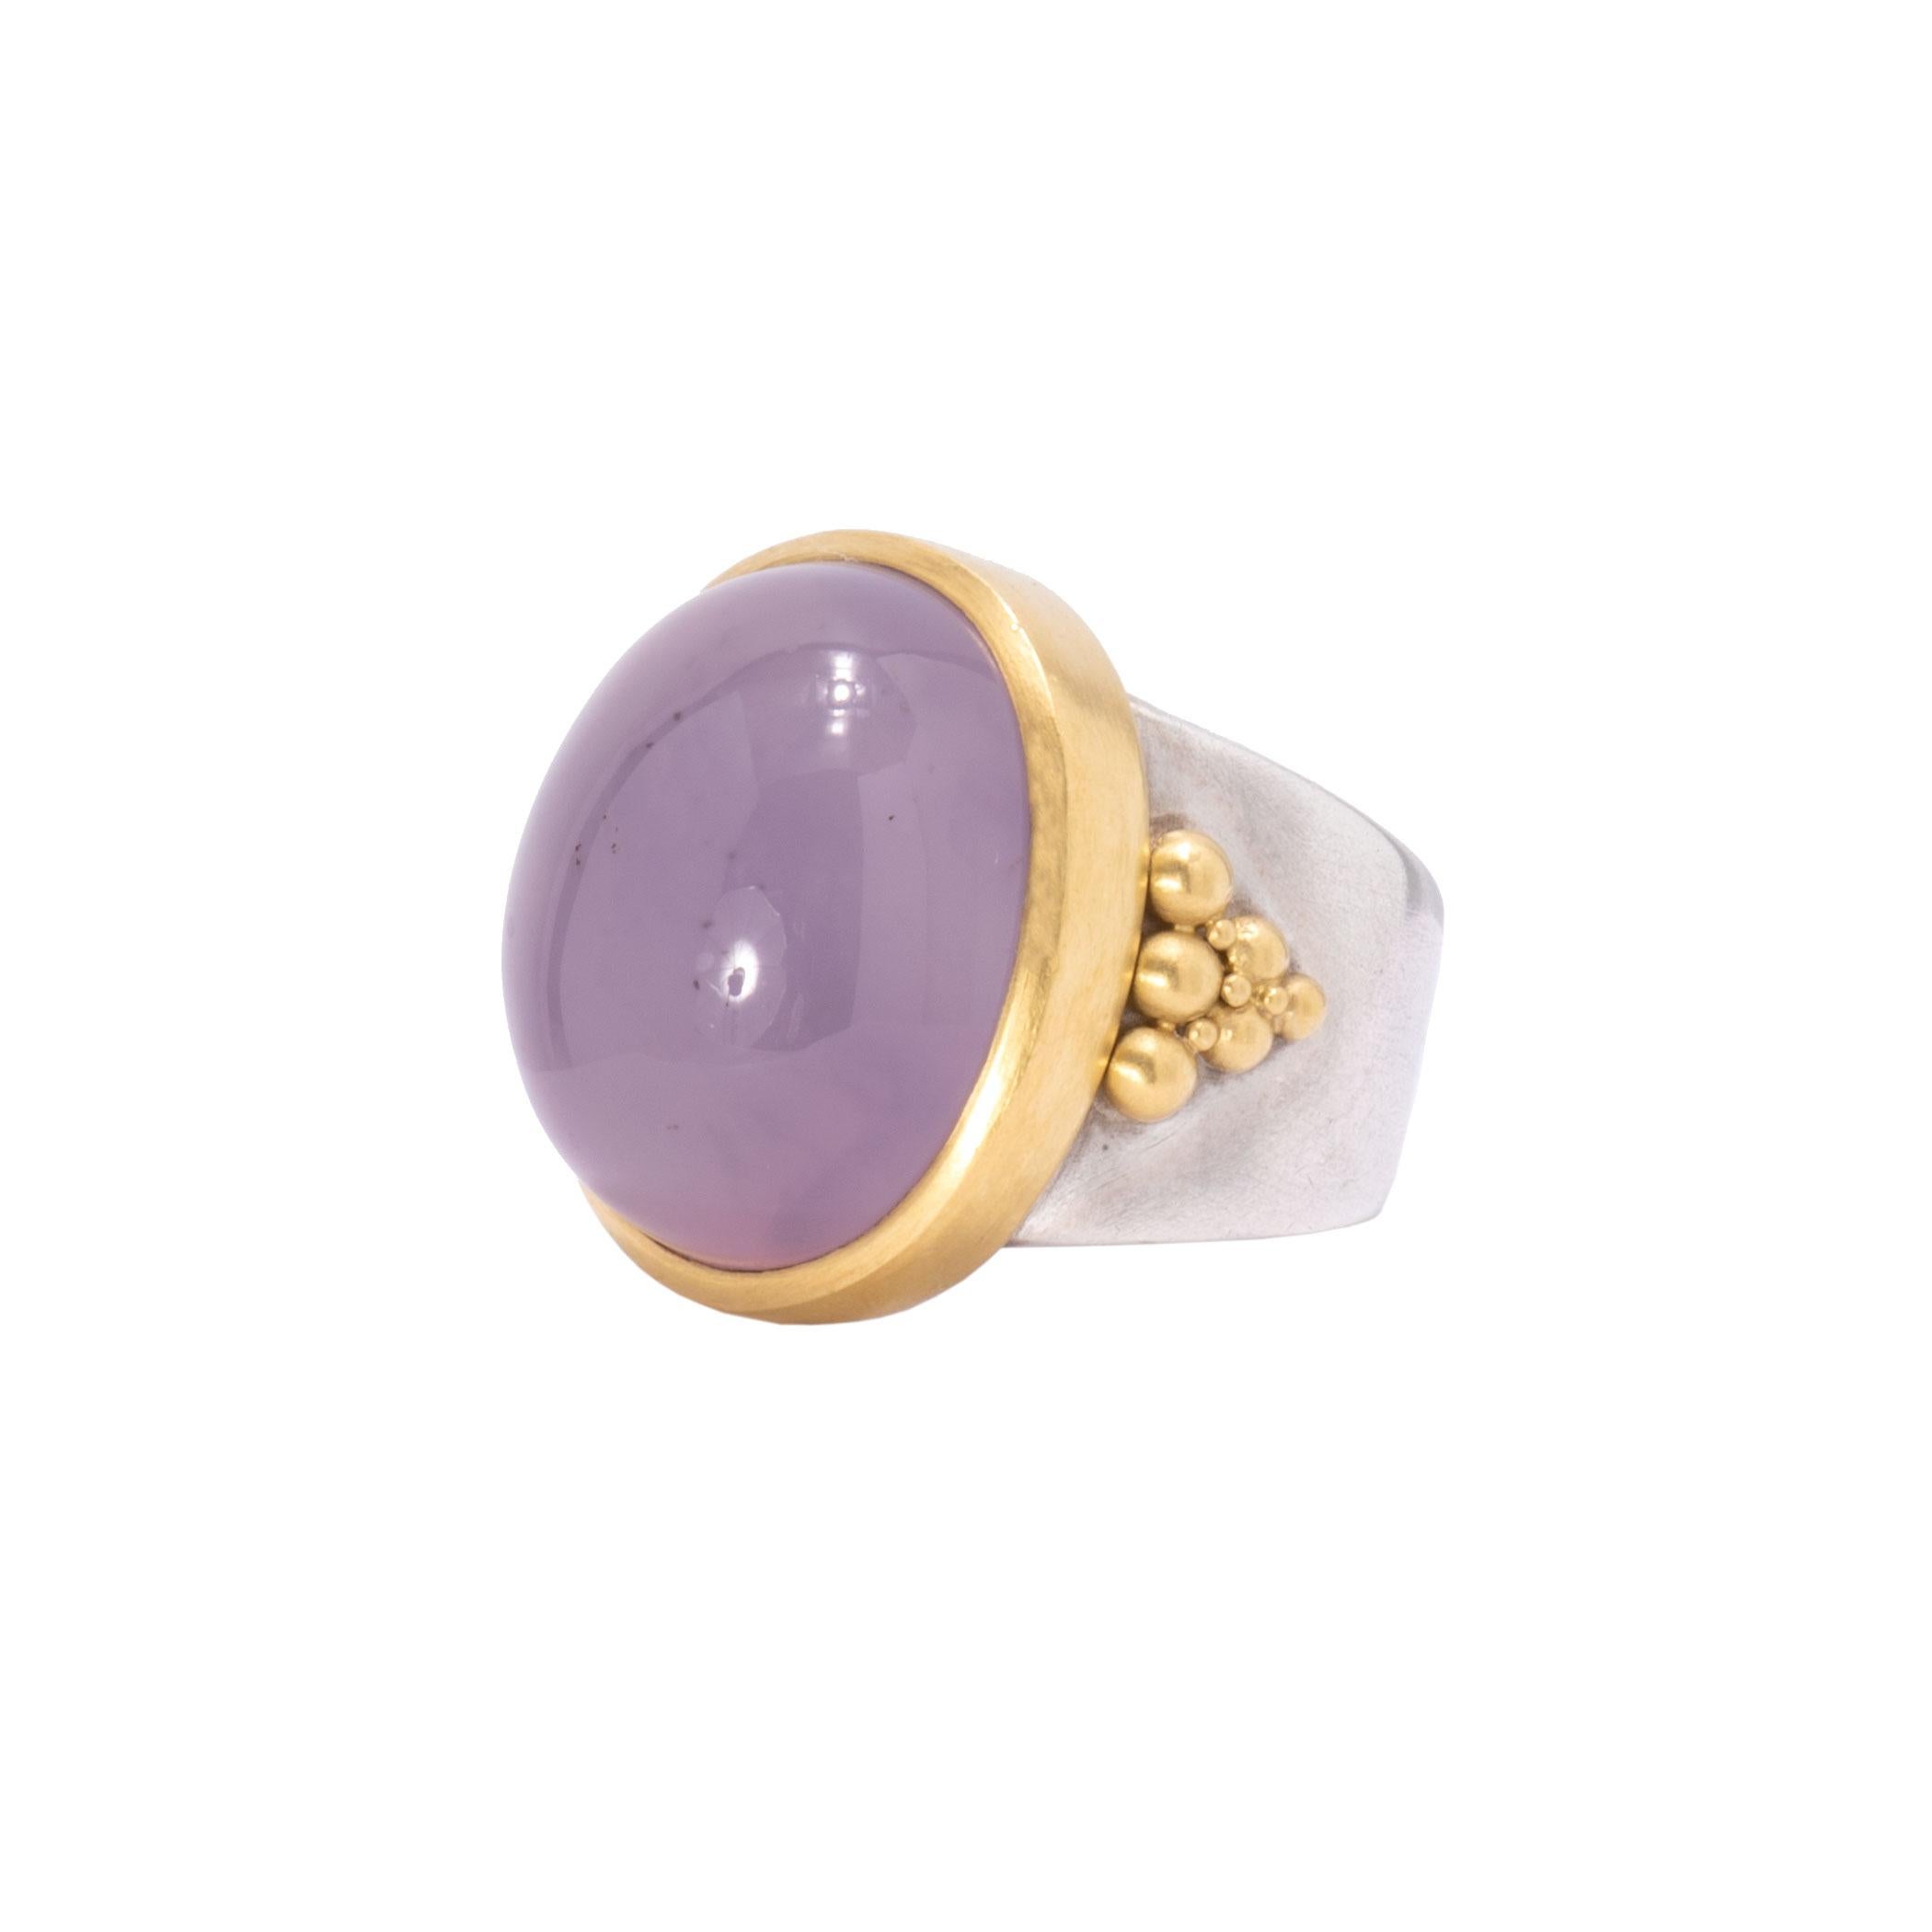 Holly Agate is a soft blue or purple toned stone and this specimen of 36.75cts is simply mesmerizing. The Holly Agate Dome Ring is set into a high 22k bezel and mounted on a wide, tapering shank in sterling silver. A cornucopia of 22k beads trickle